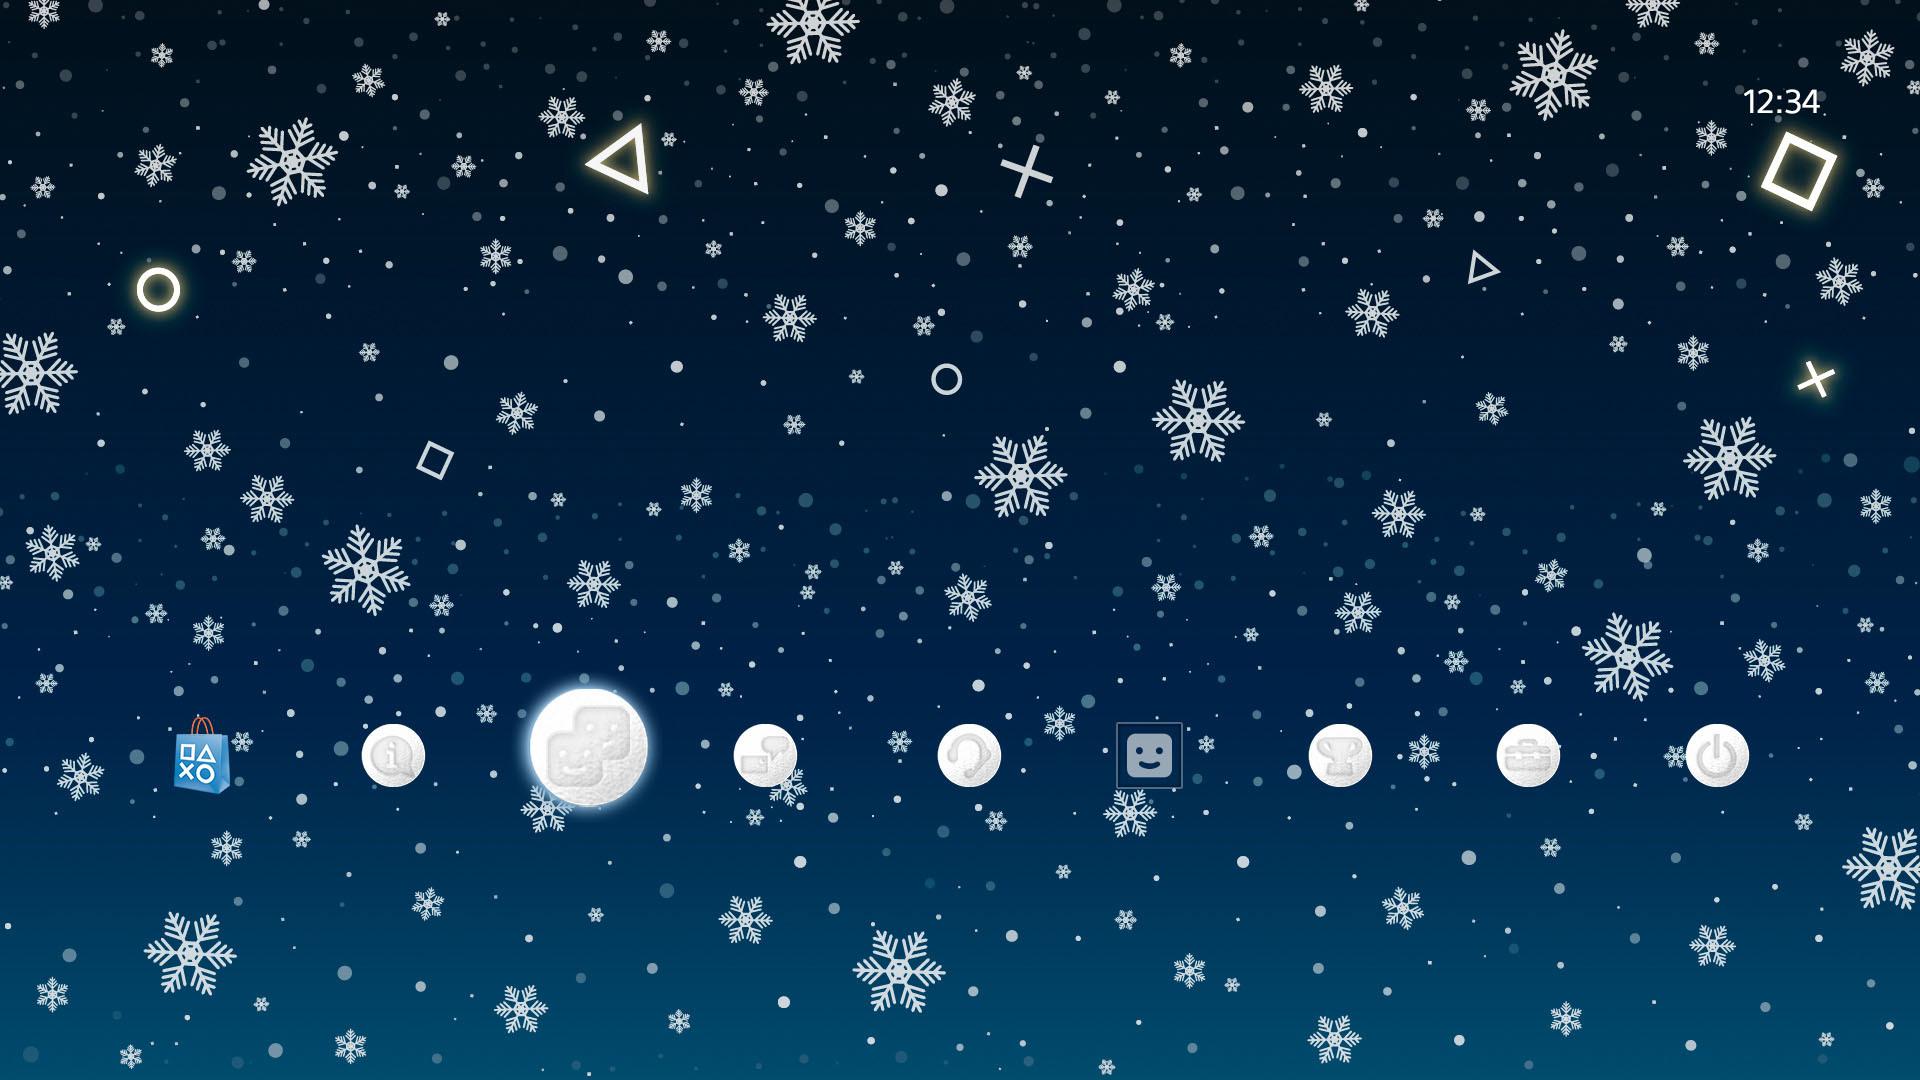 Sony Releases Festive PS4 Themes for Charity on JP PSN Just